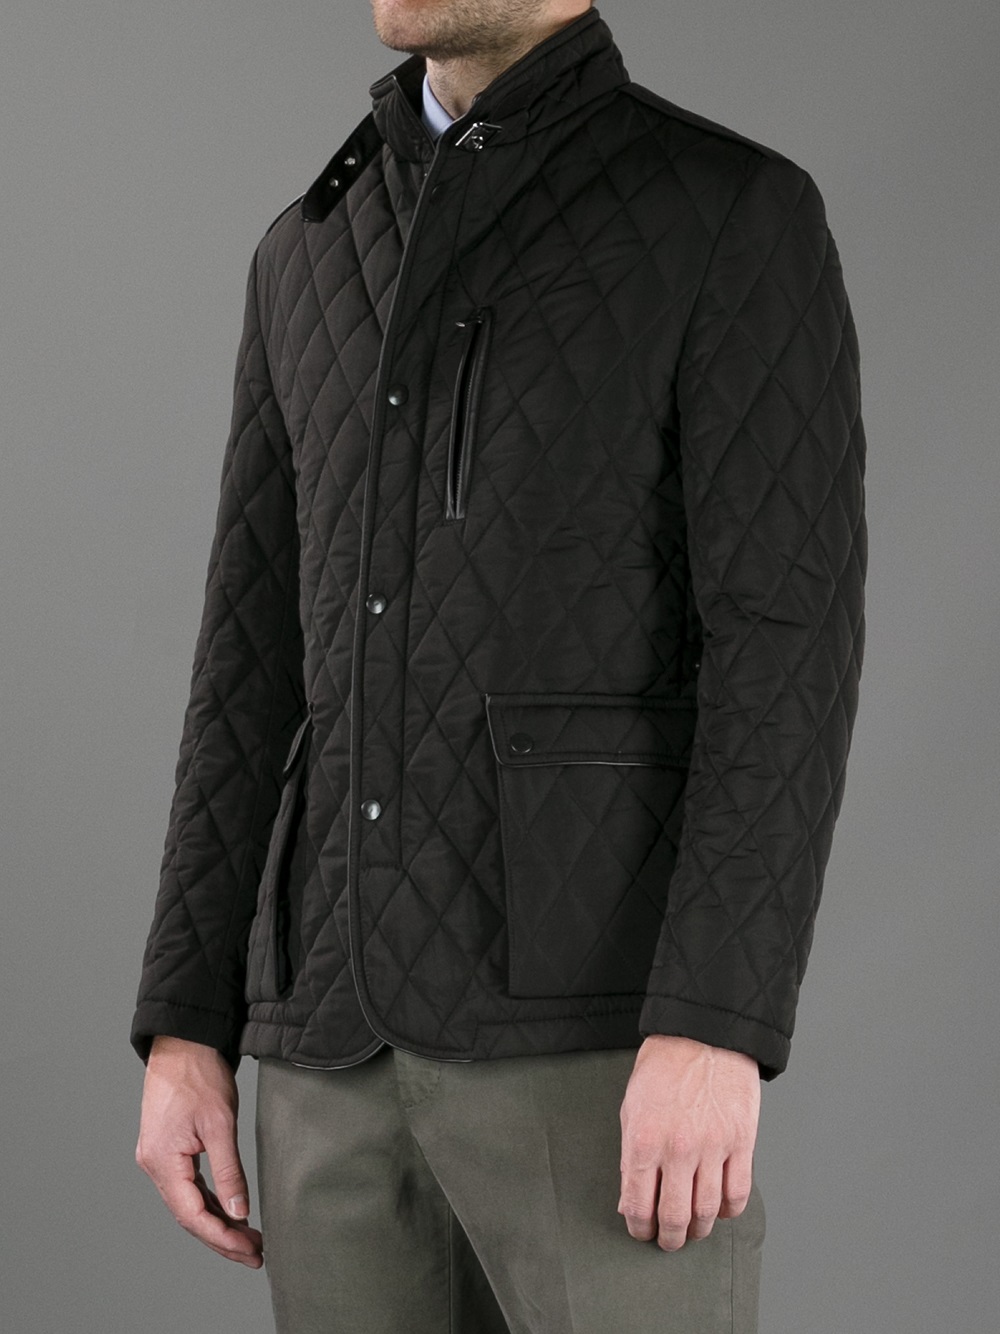 Corneliani Quilted Jacket in Brown (Black) for Men - Lyst